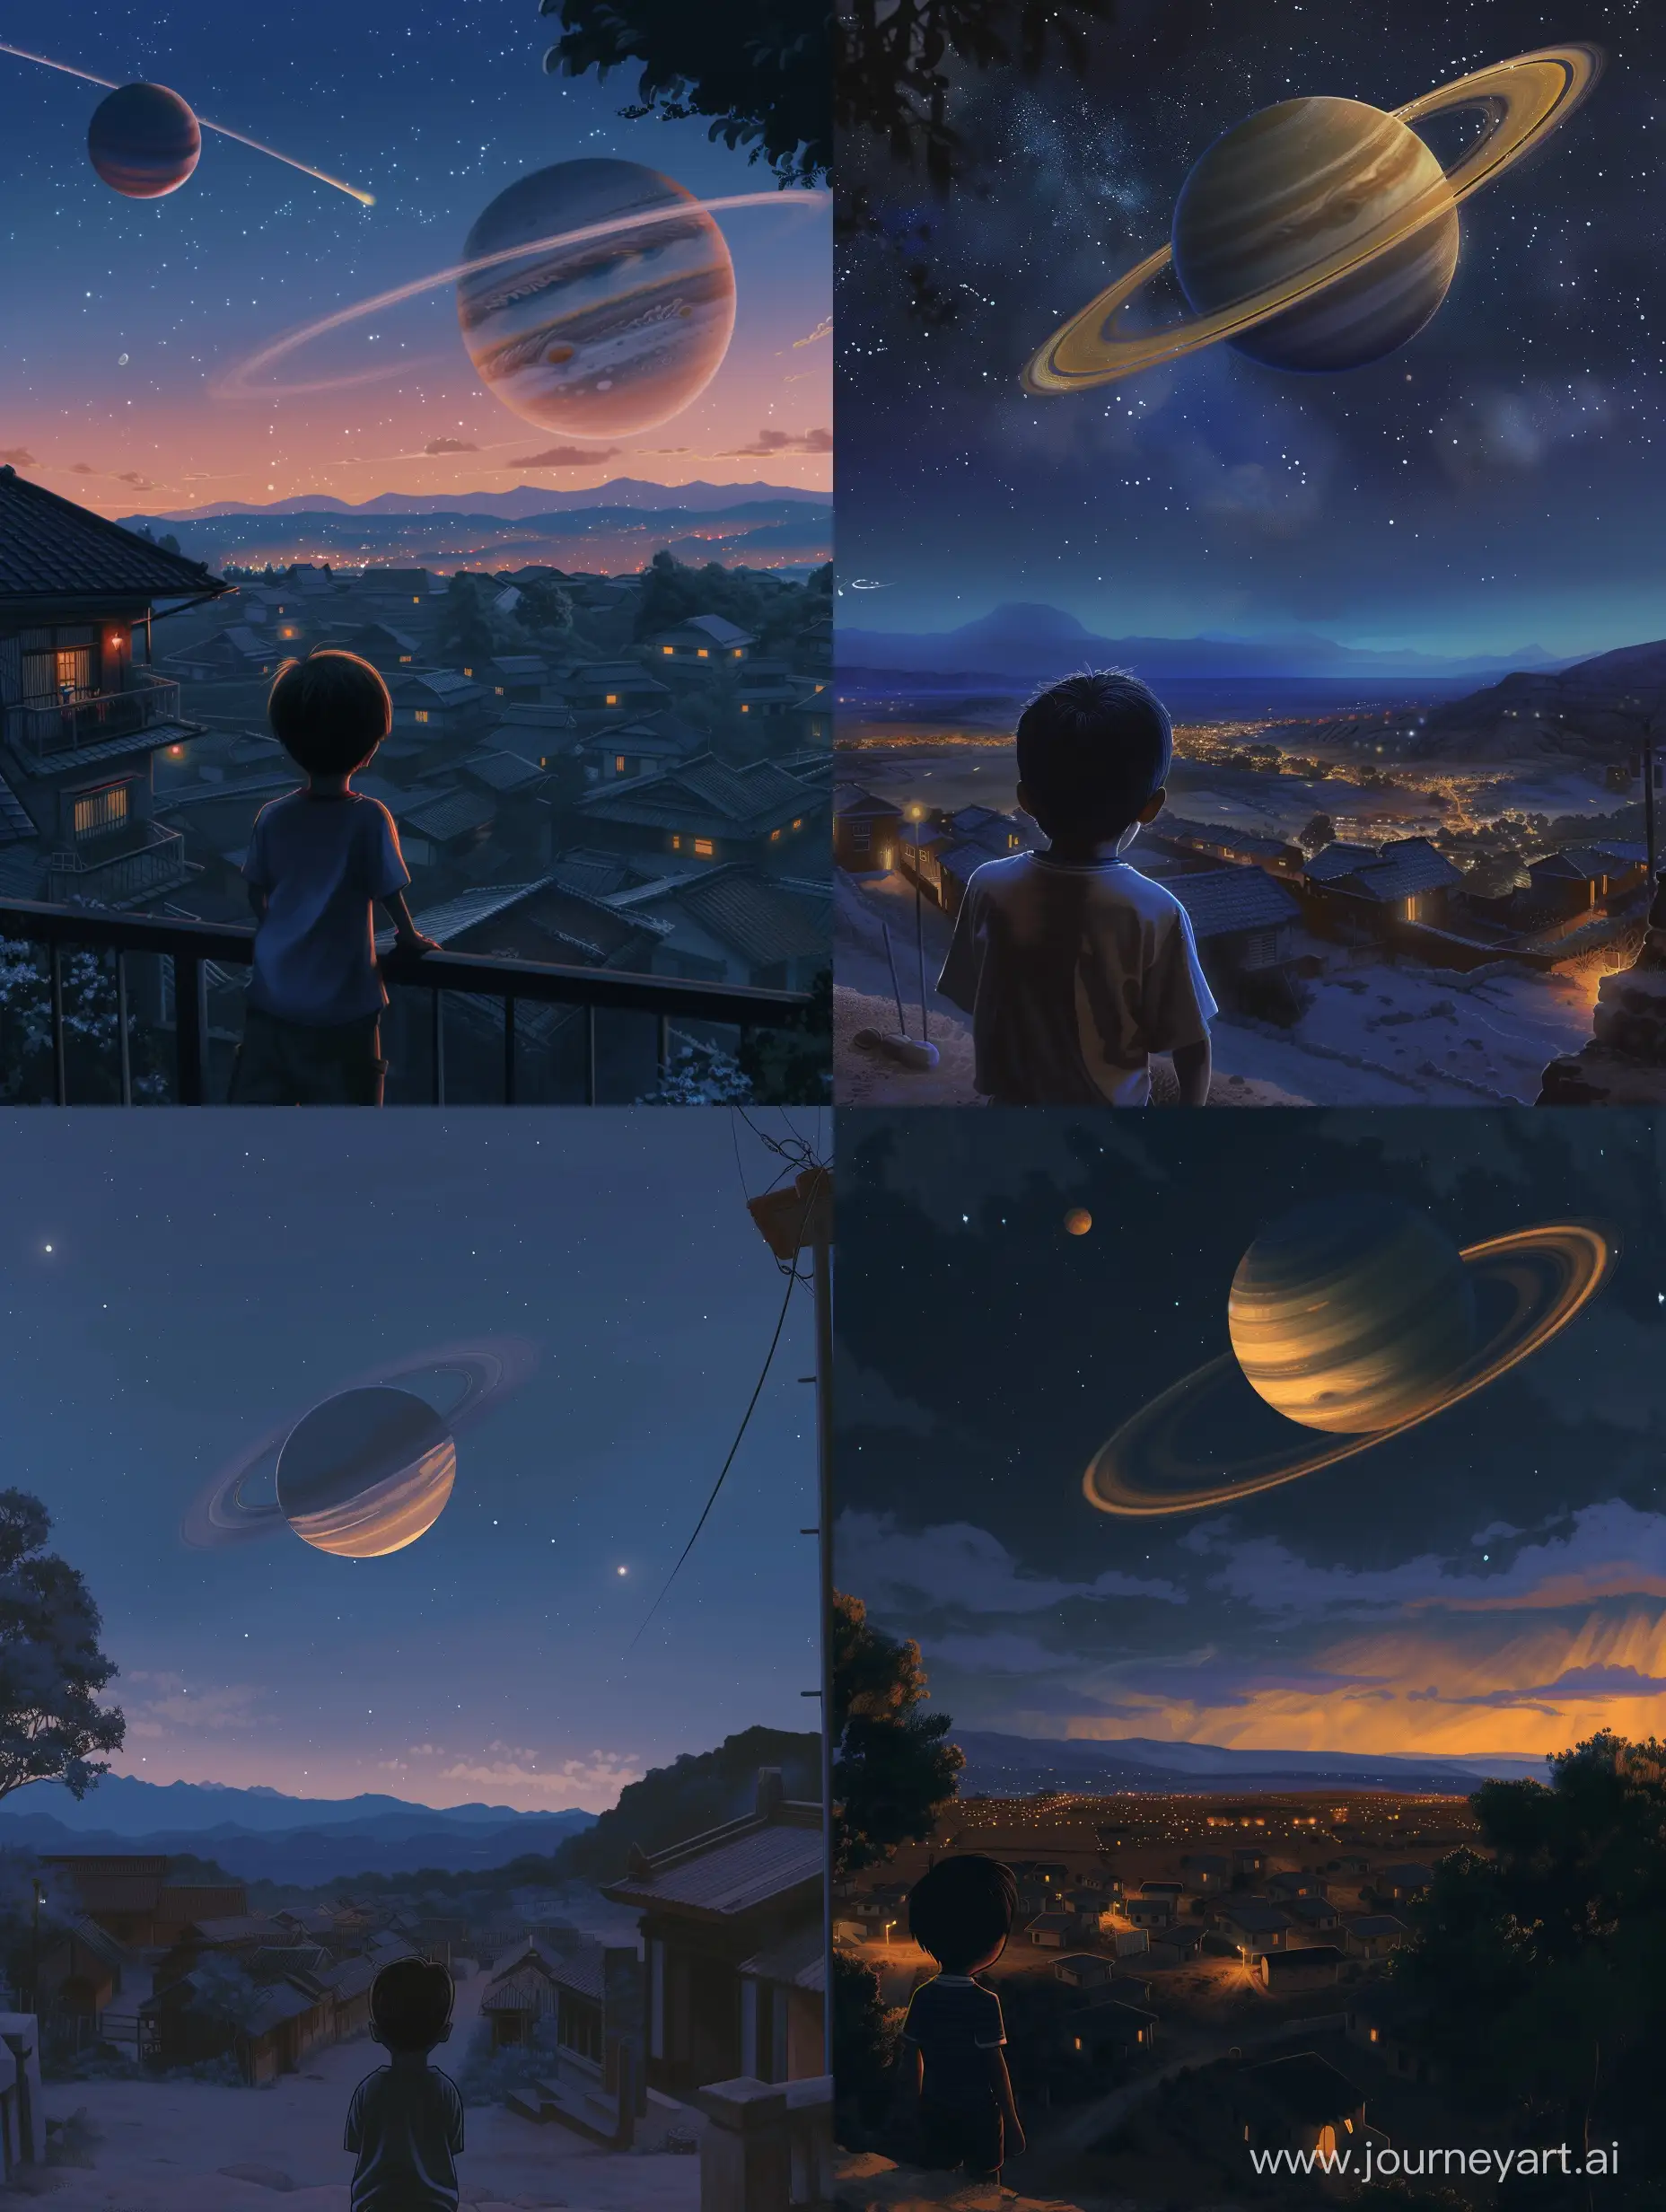 a view from a boy looking up at the sky and seeing a planet similar to saturn sitting close, almost close enough to touch. its huge in the night sky...the boy is in a well organized village at dusk